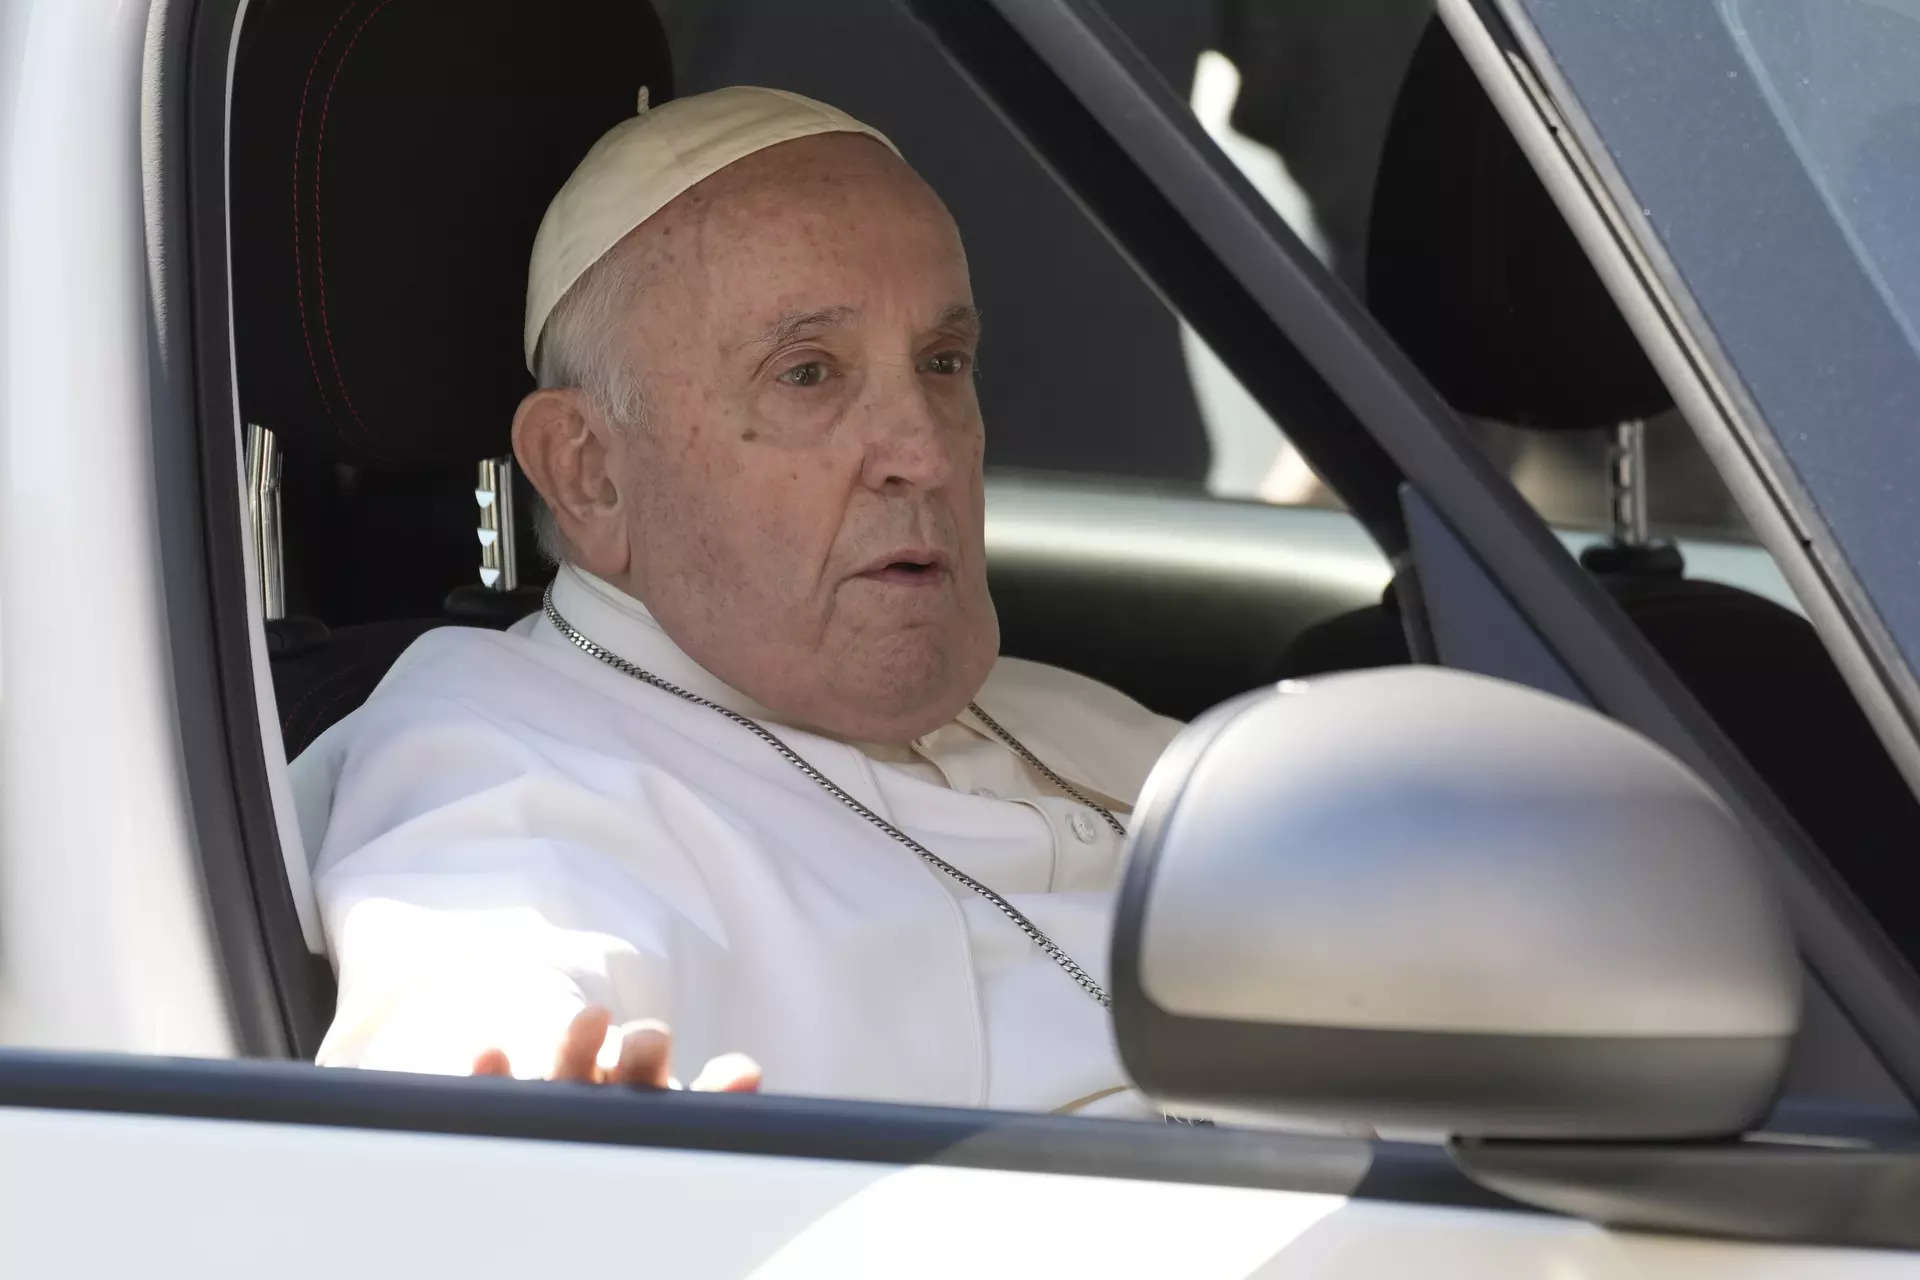 Pope short of breath says he's still feeling effects of anesthesia 2 weeks after surgery